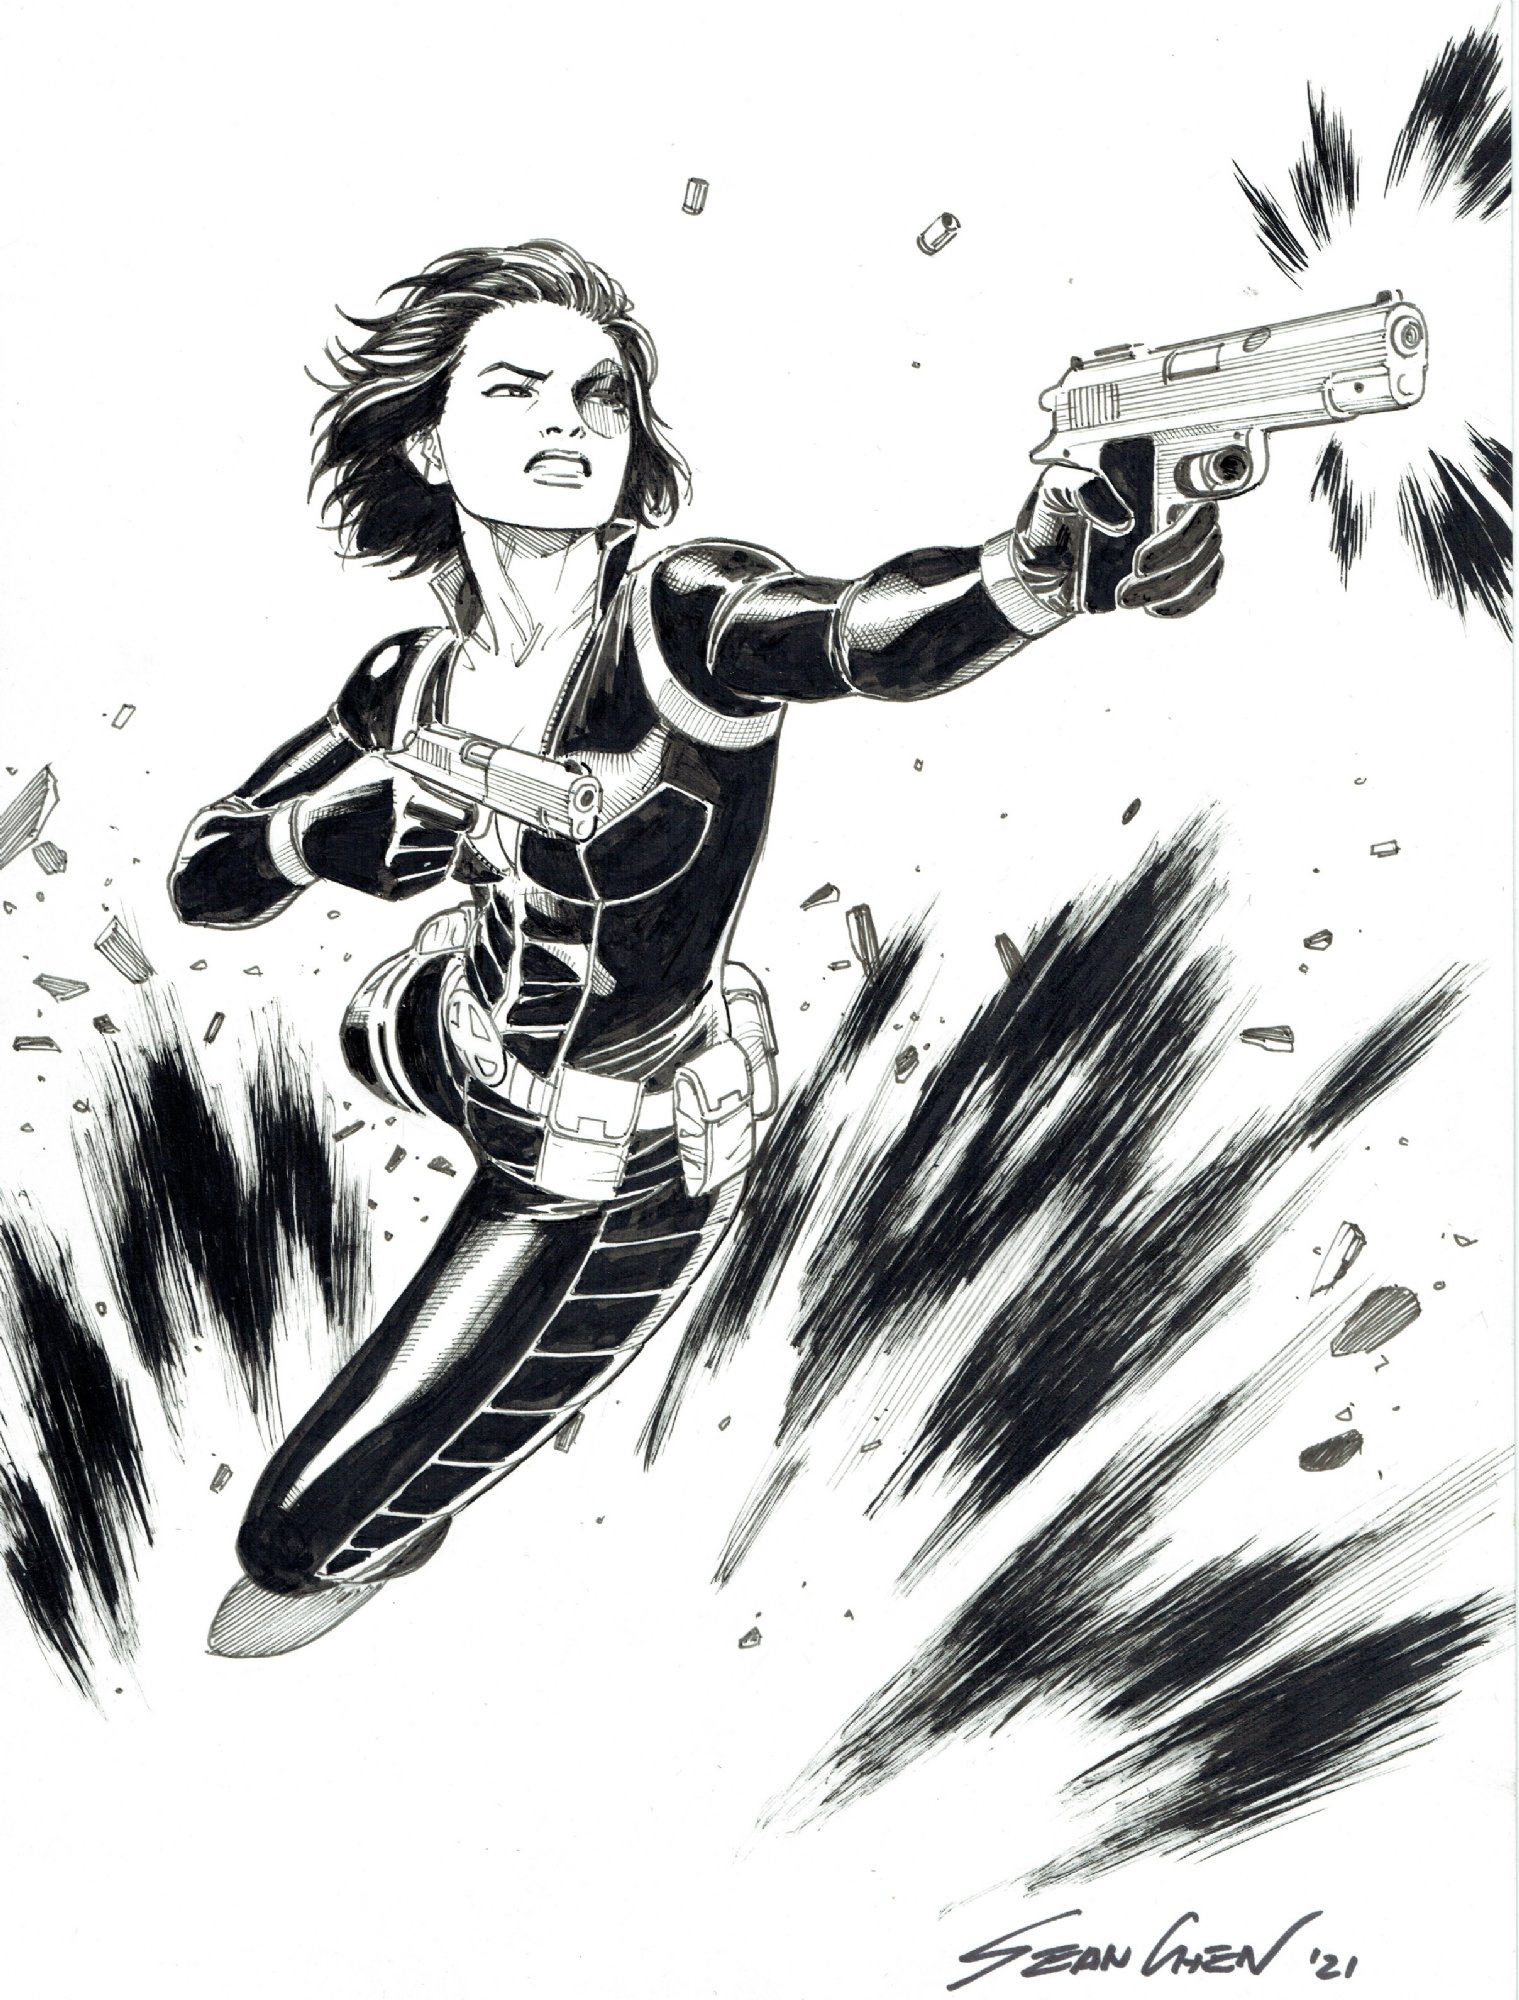 Domino Commission by Sean Chen, in Jason Wood's Commissions and ...